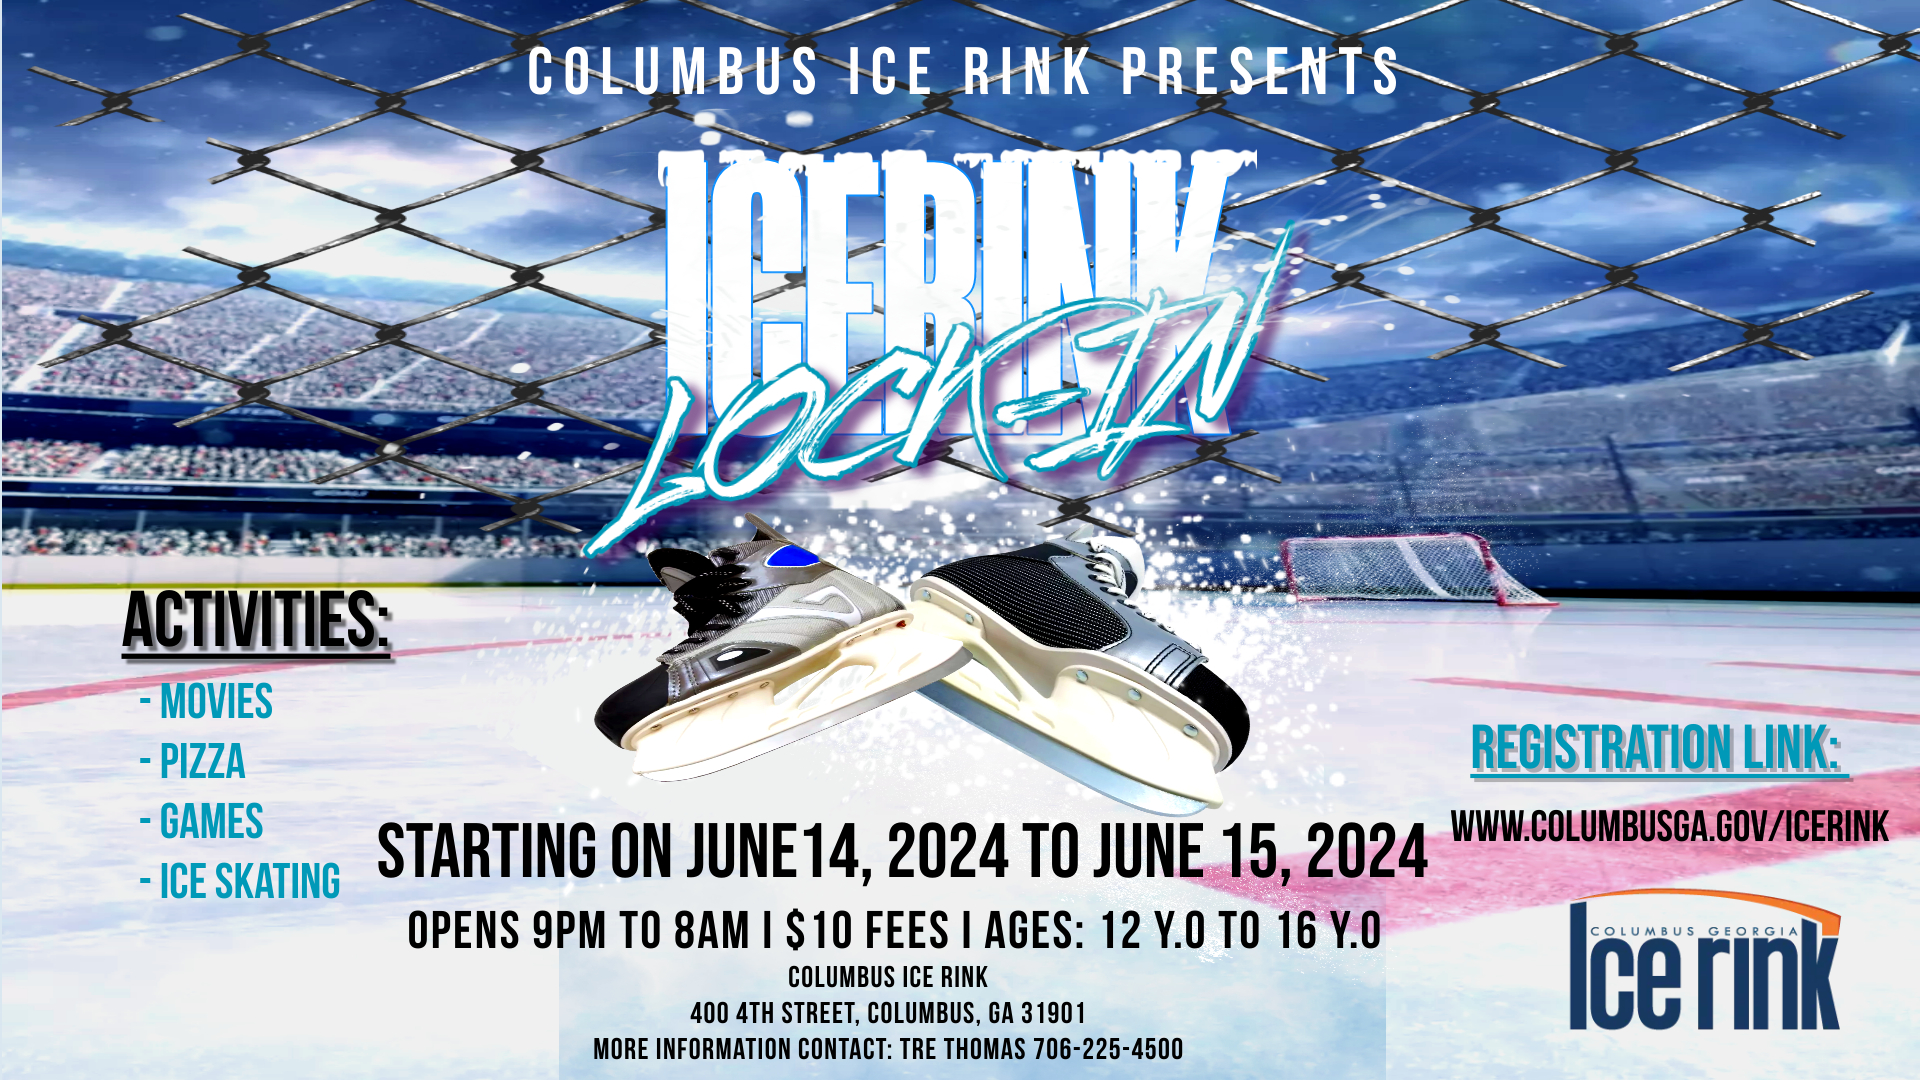 Ice rink lock in featuring movies, games, pizza, and ice skating. From 9PM on June 14th to 8AM on June 15th